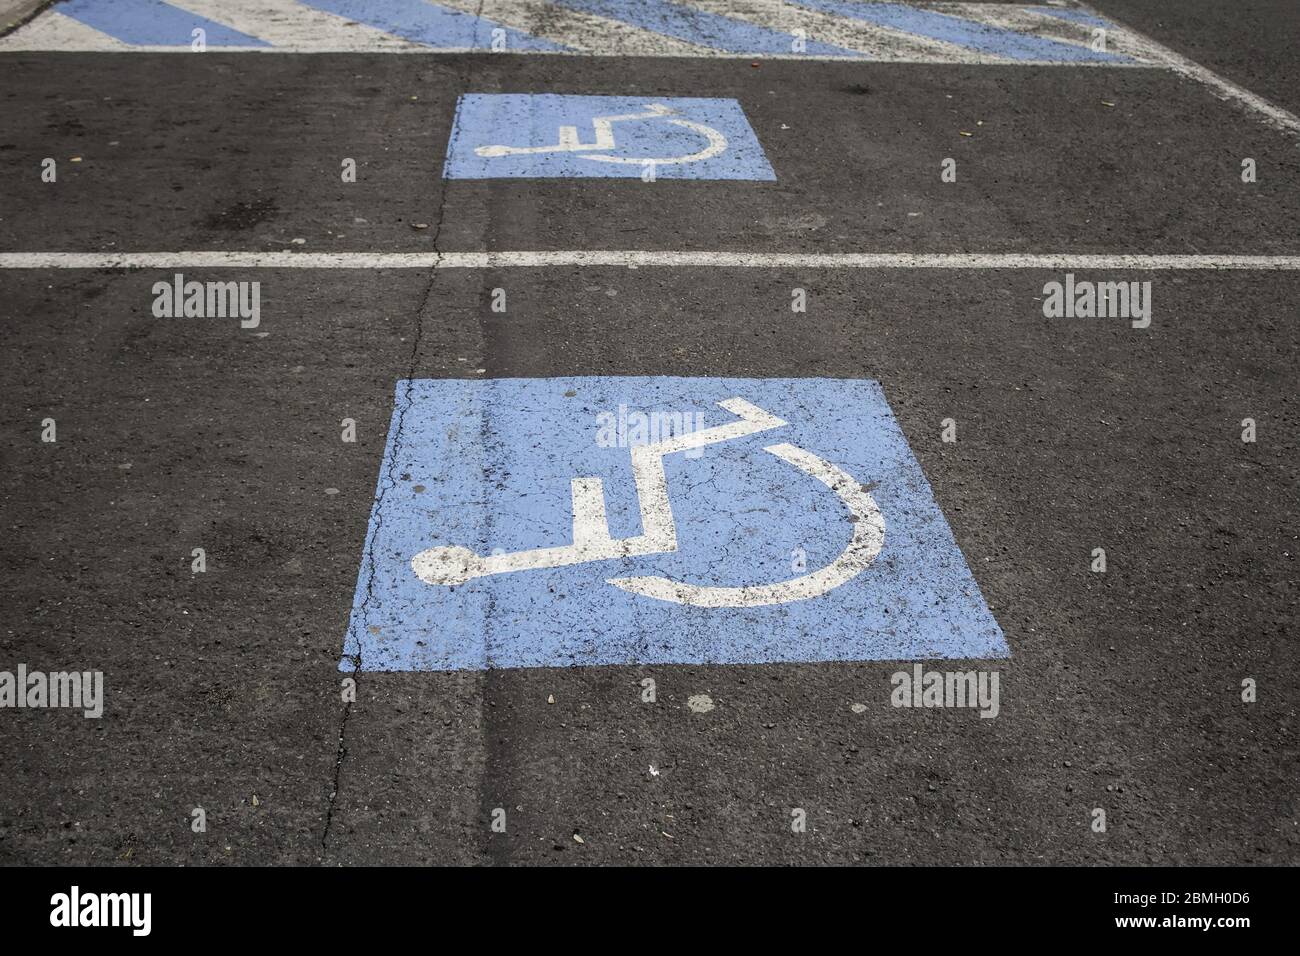 disabled parking symbol, vehicle and transport, accessibility Stock Photo